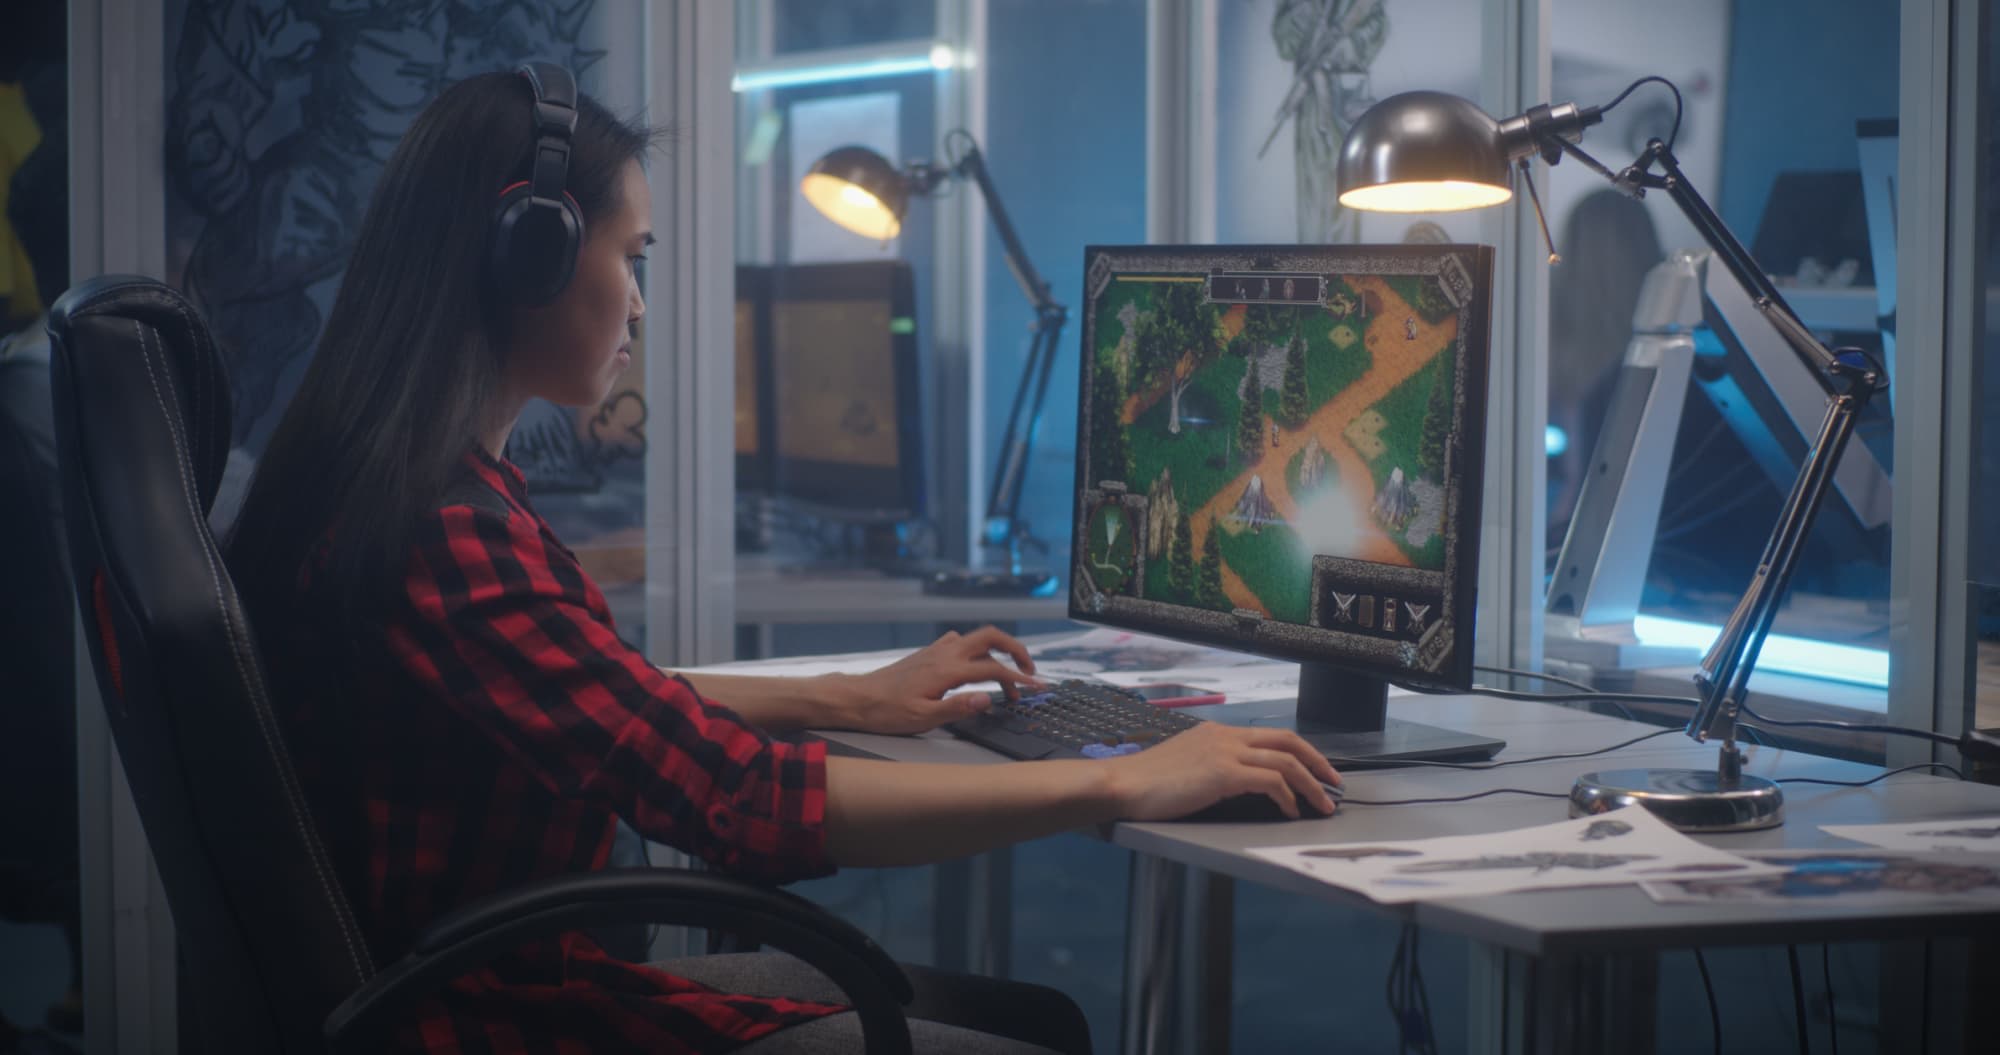 10 Lessons about Goals from Video Game Design —